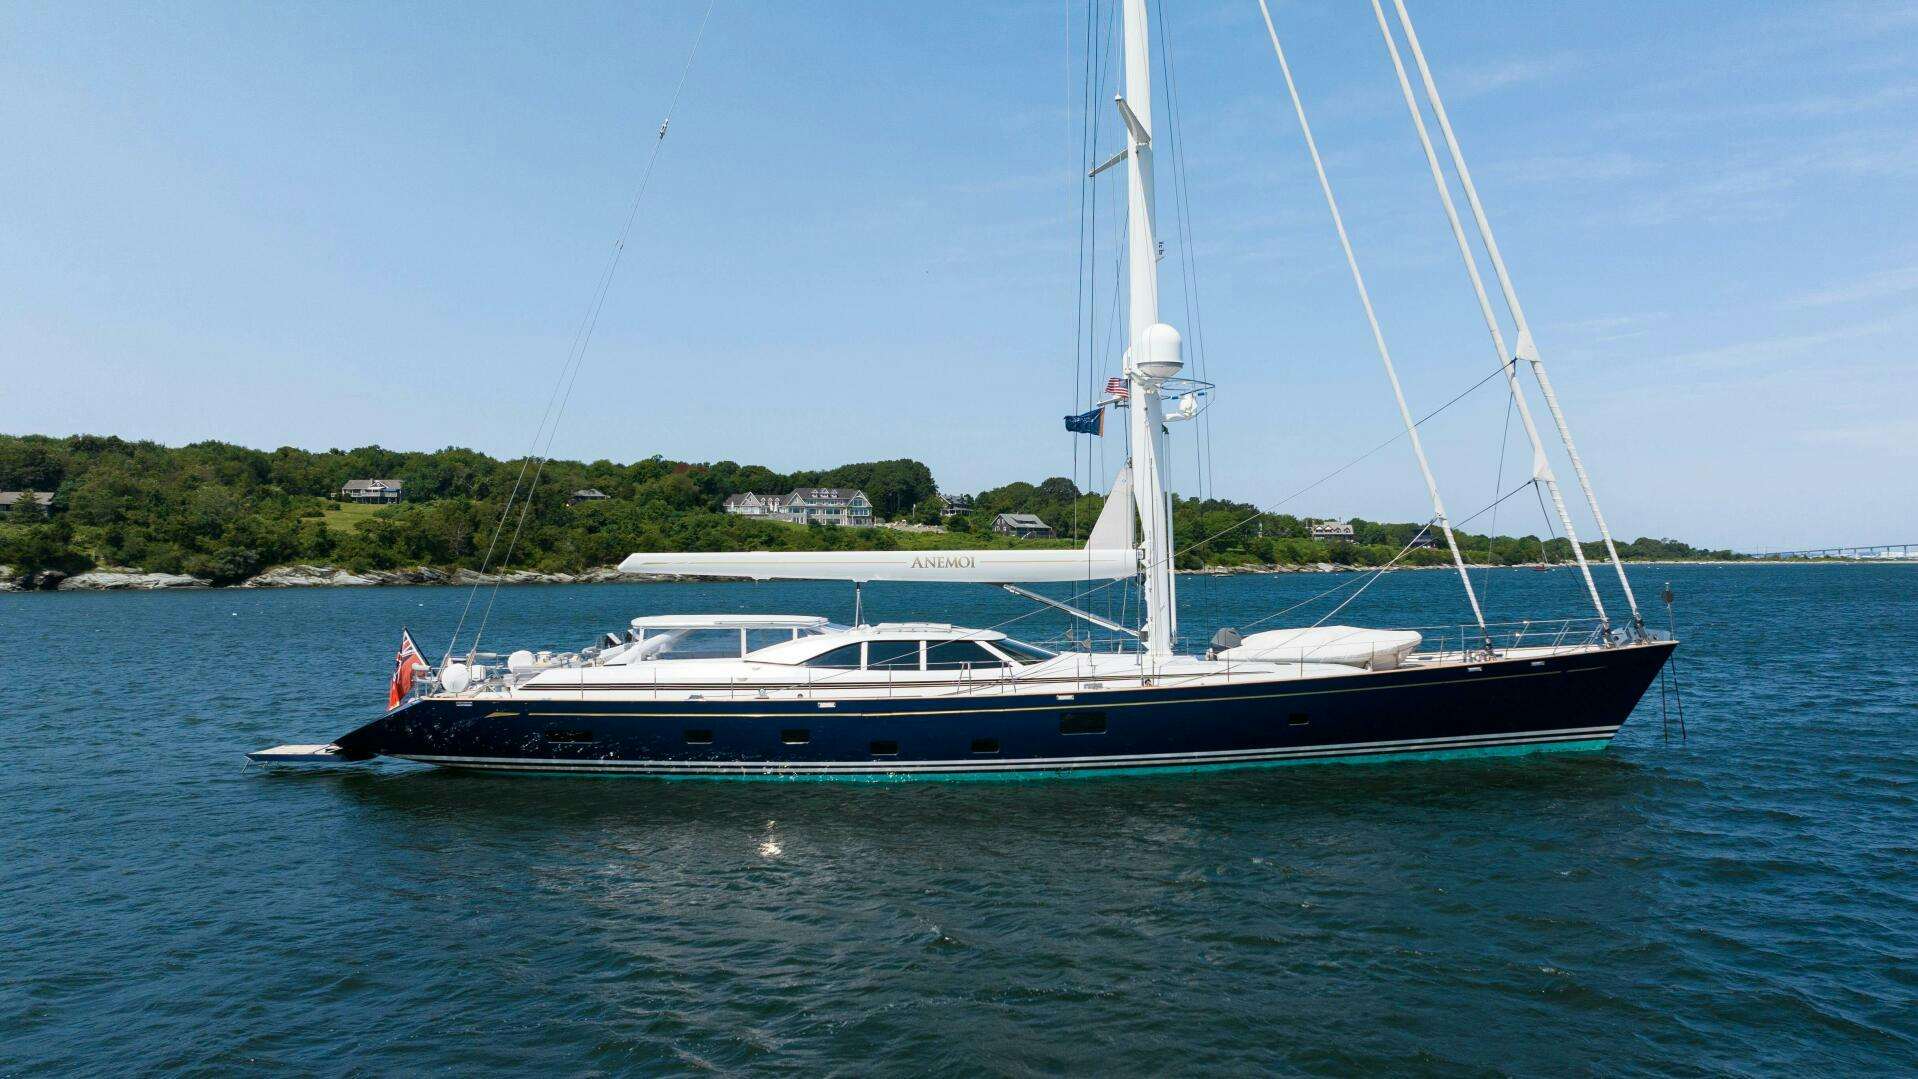 Anemoi
Yacht for Sale